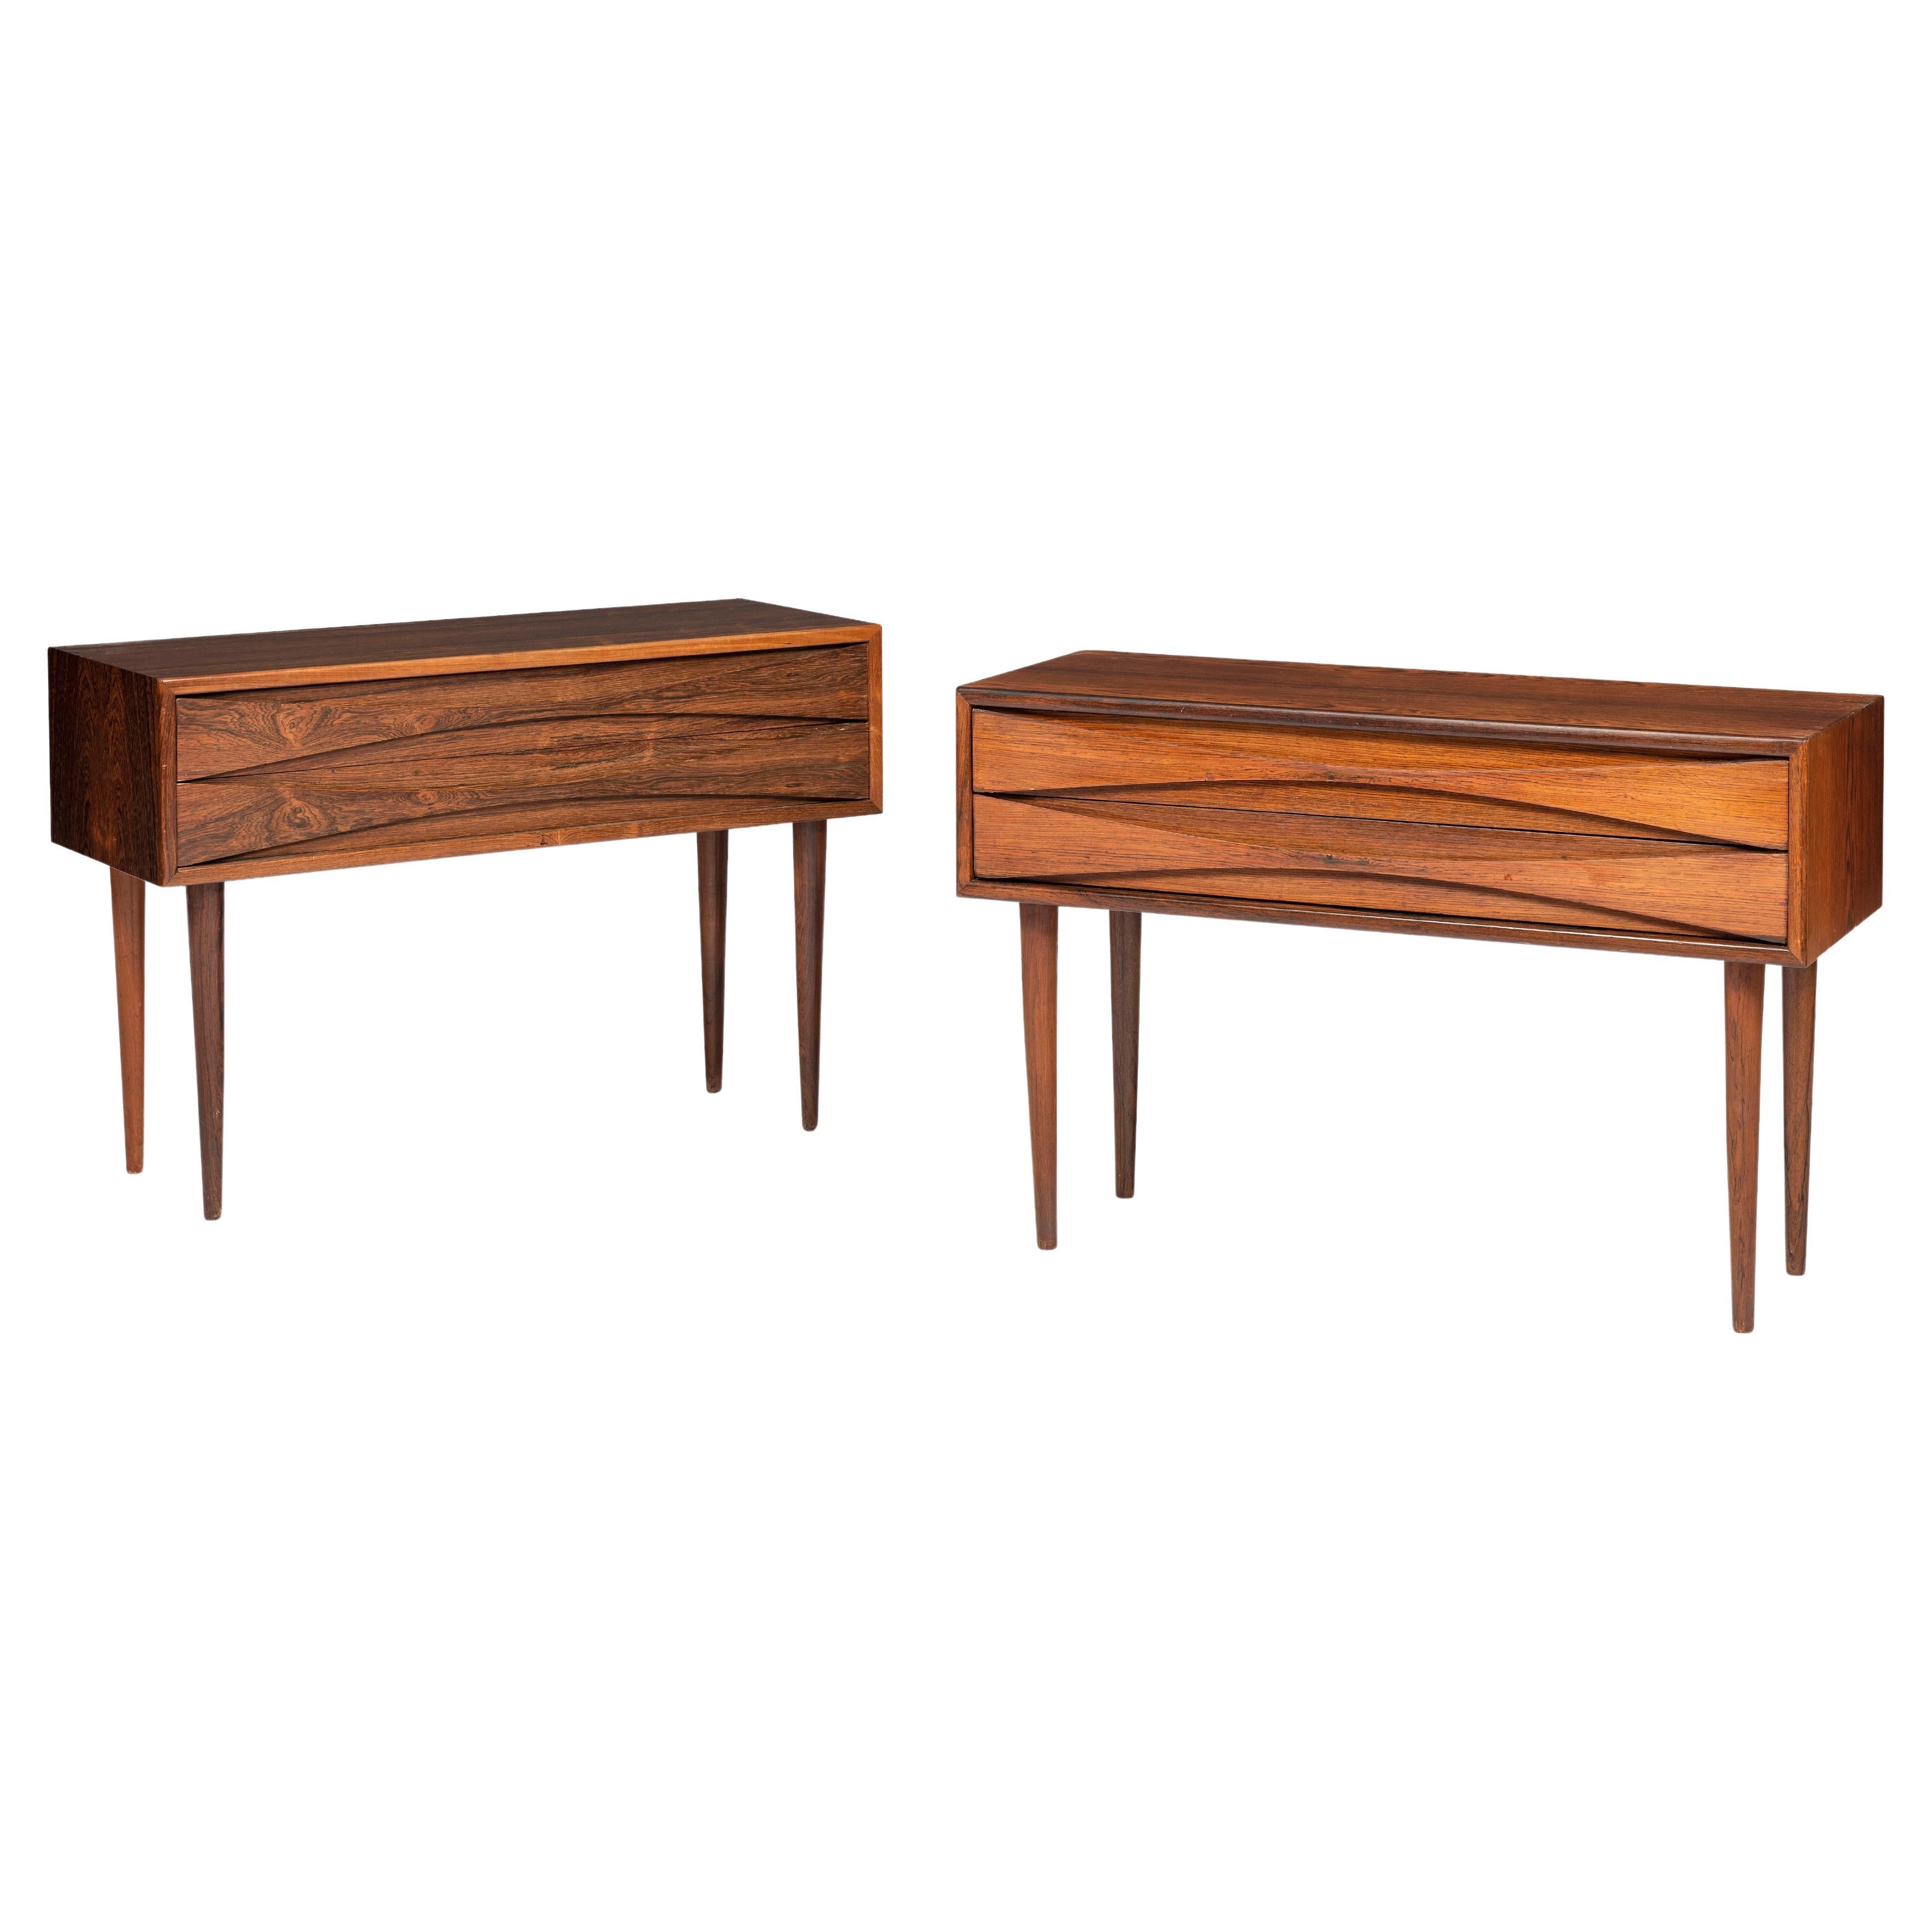 Pair of Swedish Modern Rosewood Night Stands by Niels Clausen, 1960's